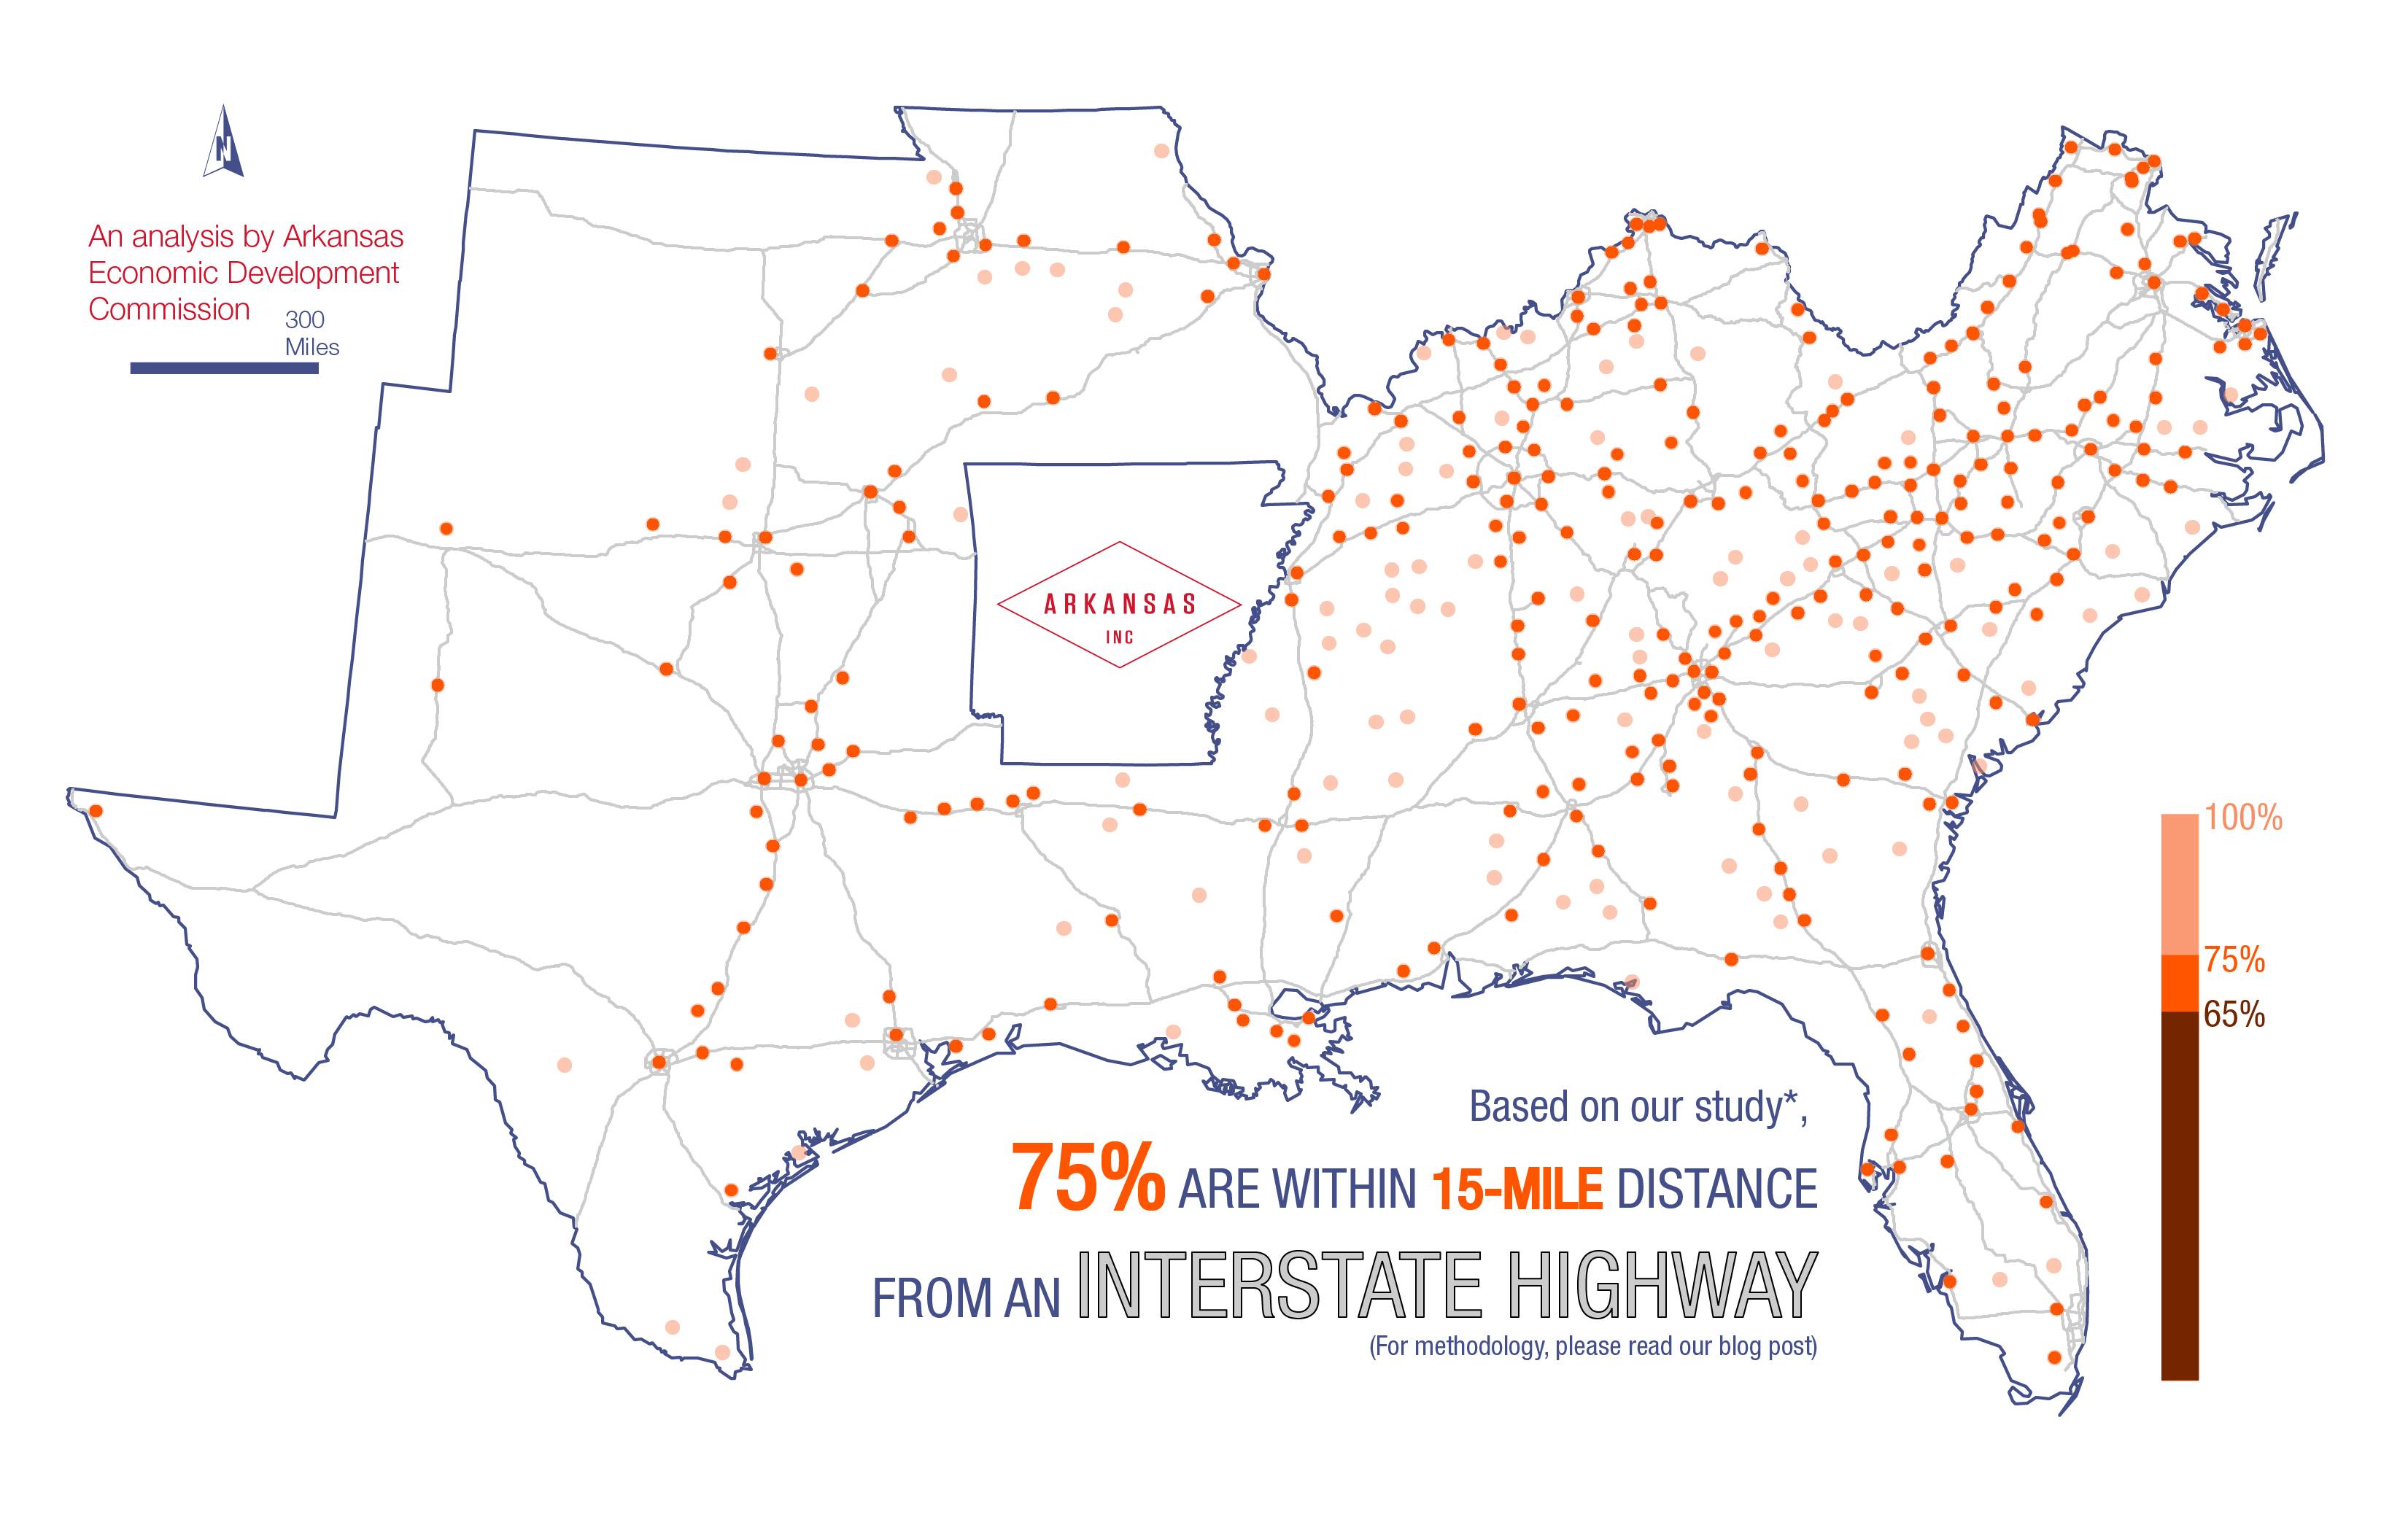 75% of qualified investments are located within 15 miles of an insterstate